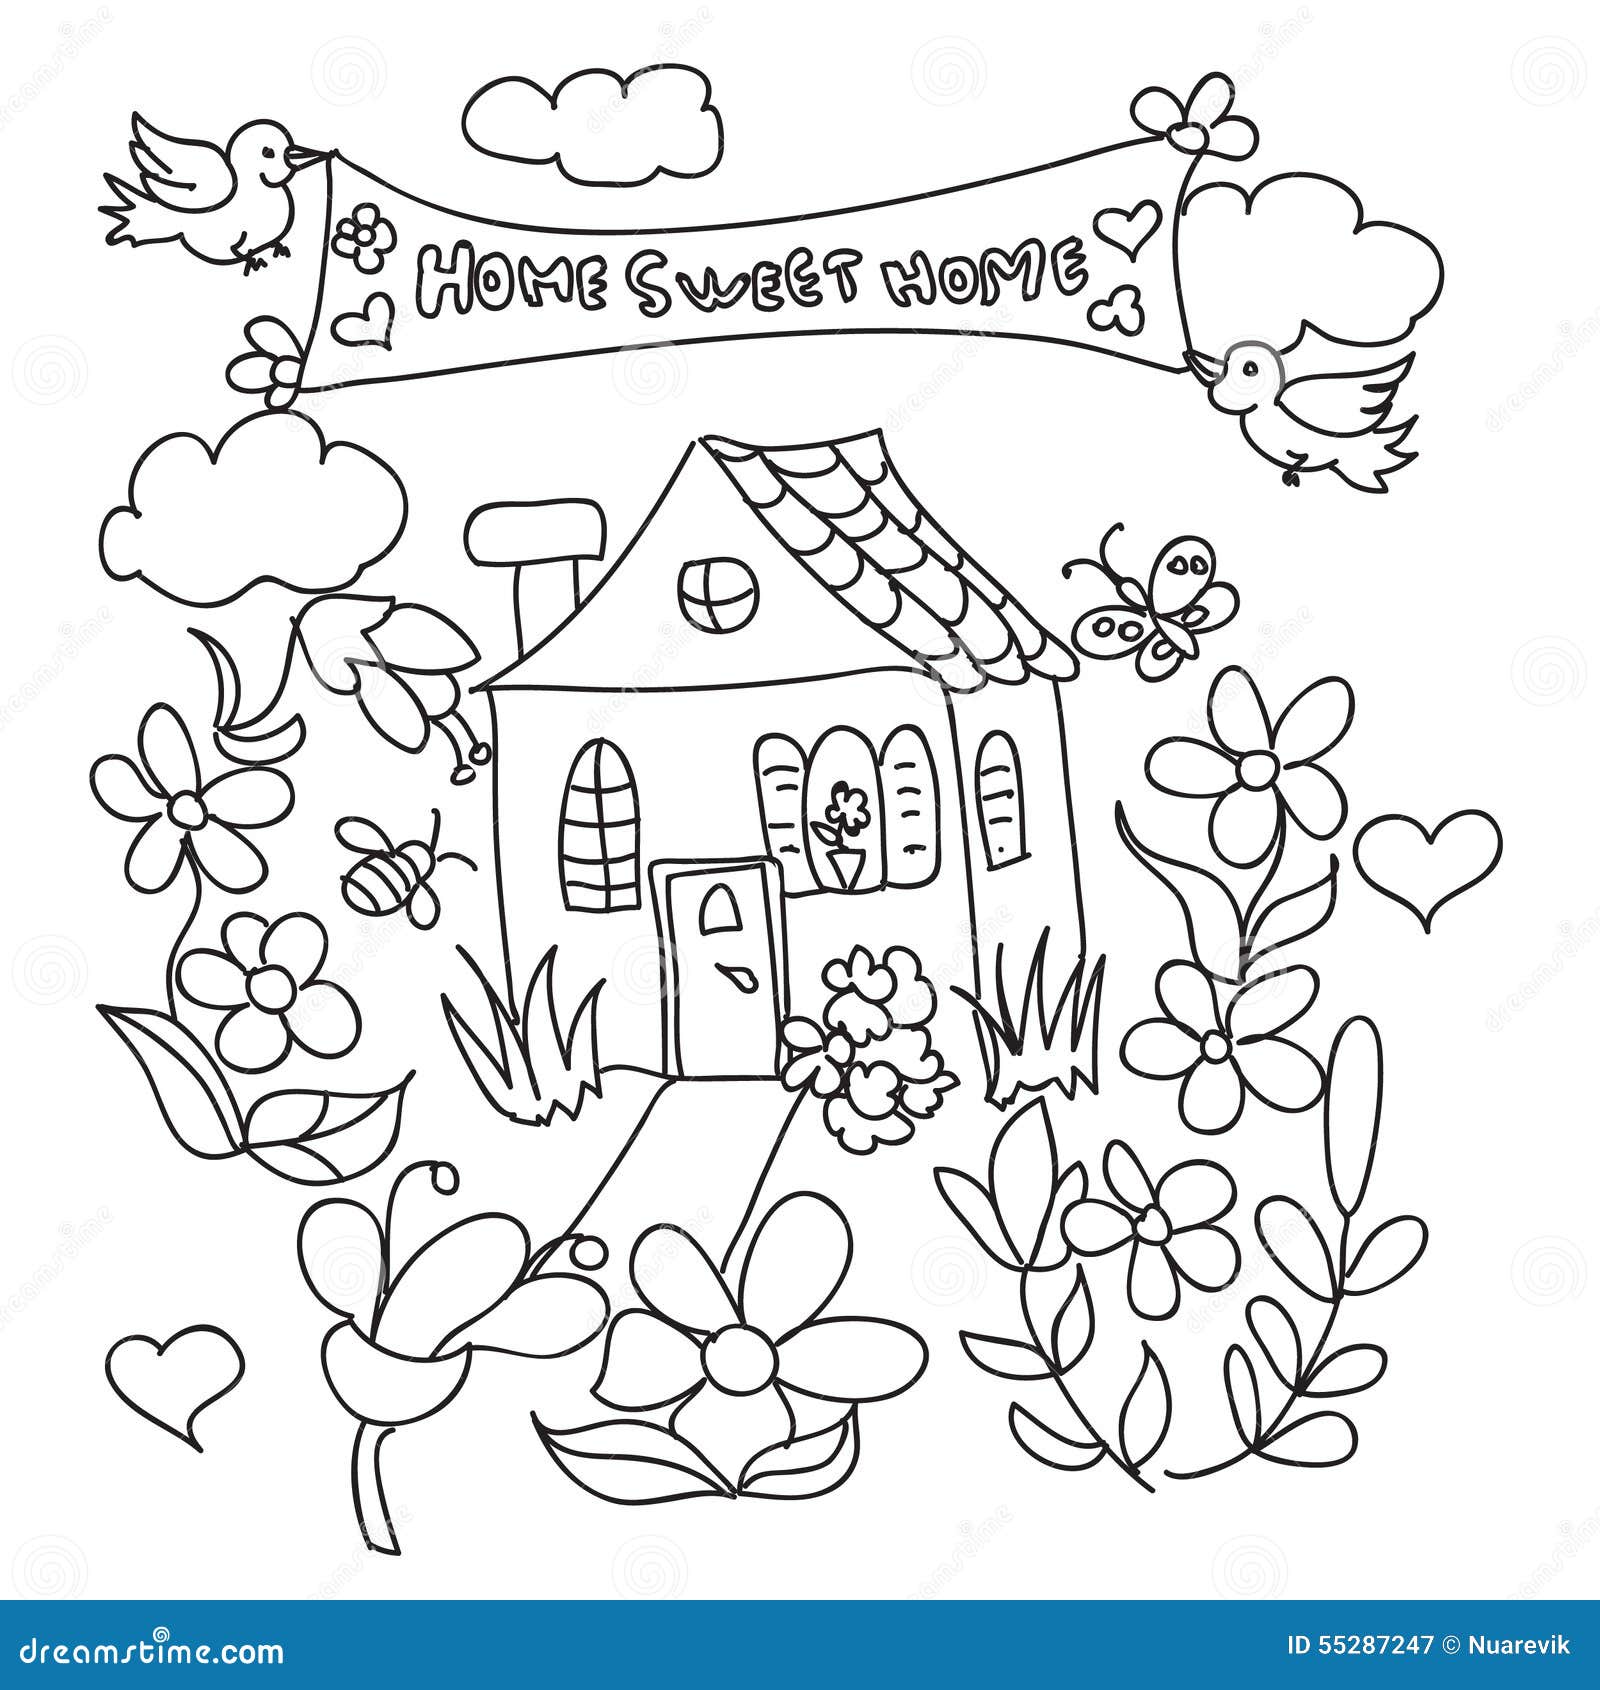 Sweet home doodles coloring page stock illustration